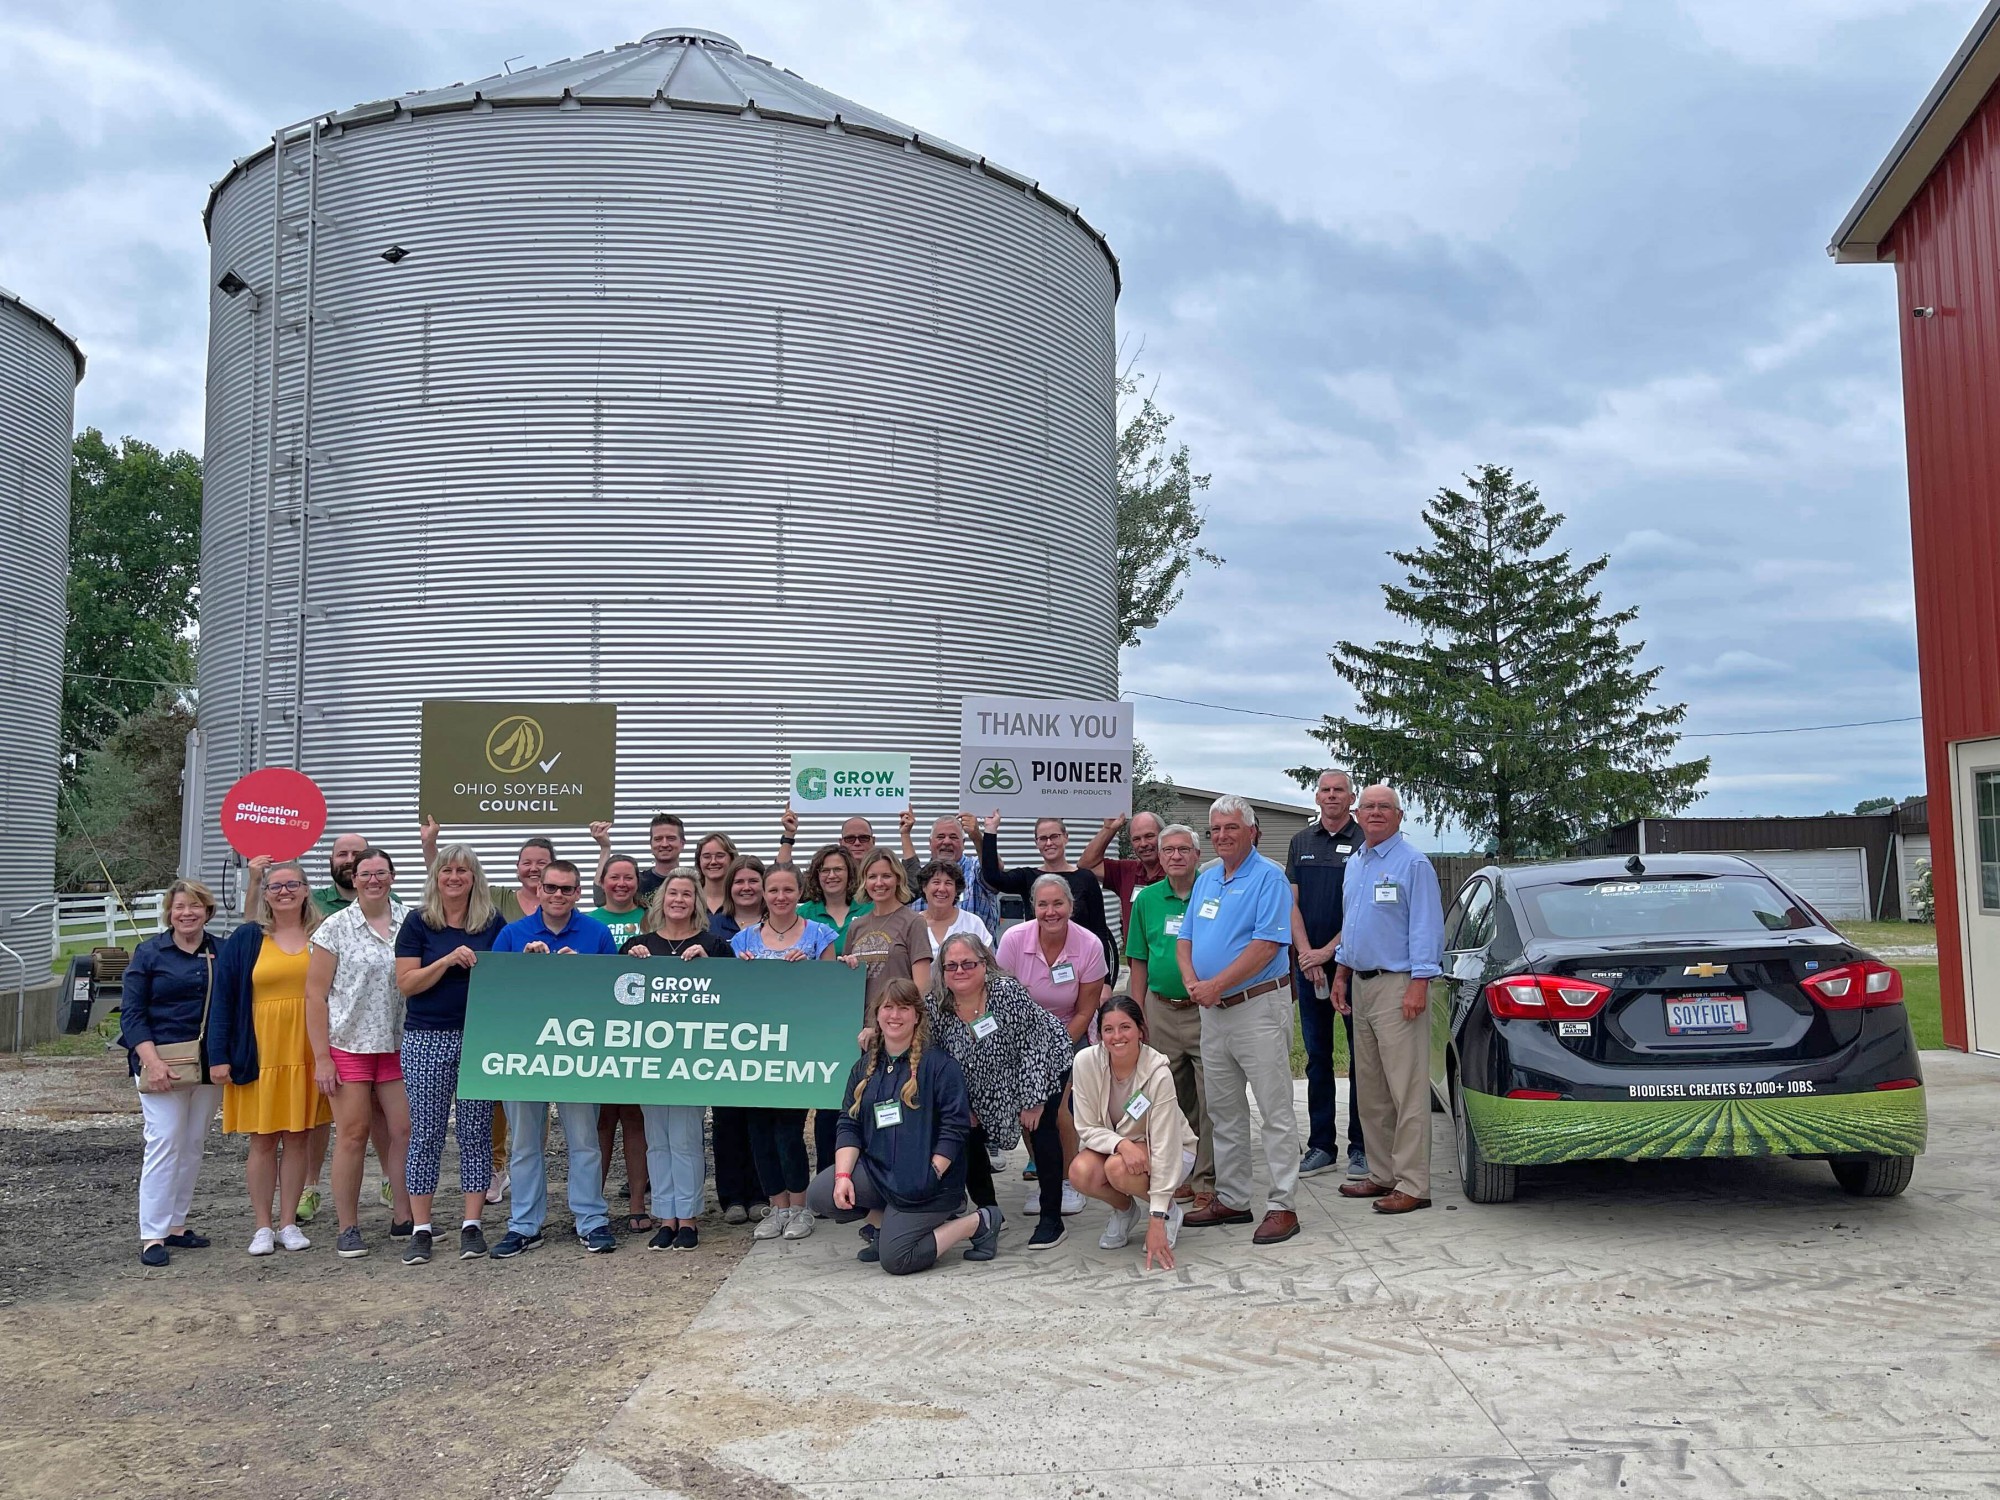 “Our board is committed to making a difference through education by using the connection between agriculture and the science classroom.